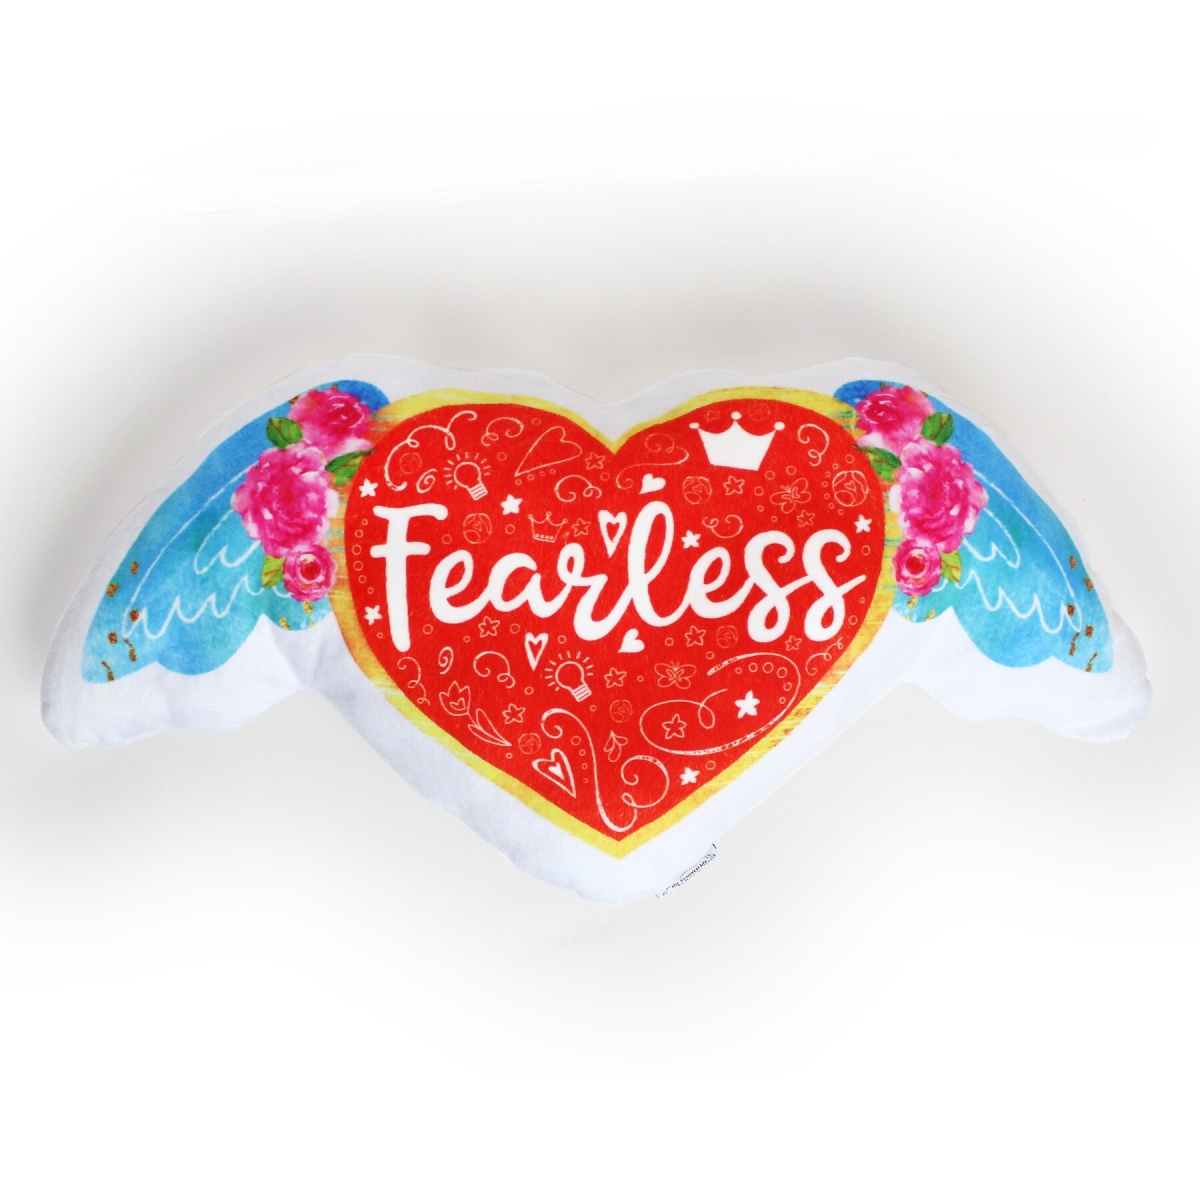 2006 Fearless Throw Pillow - Multi Color